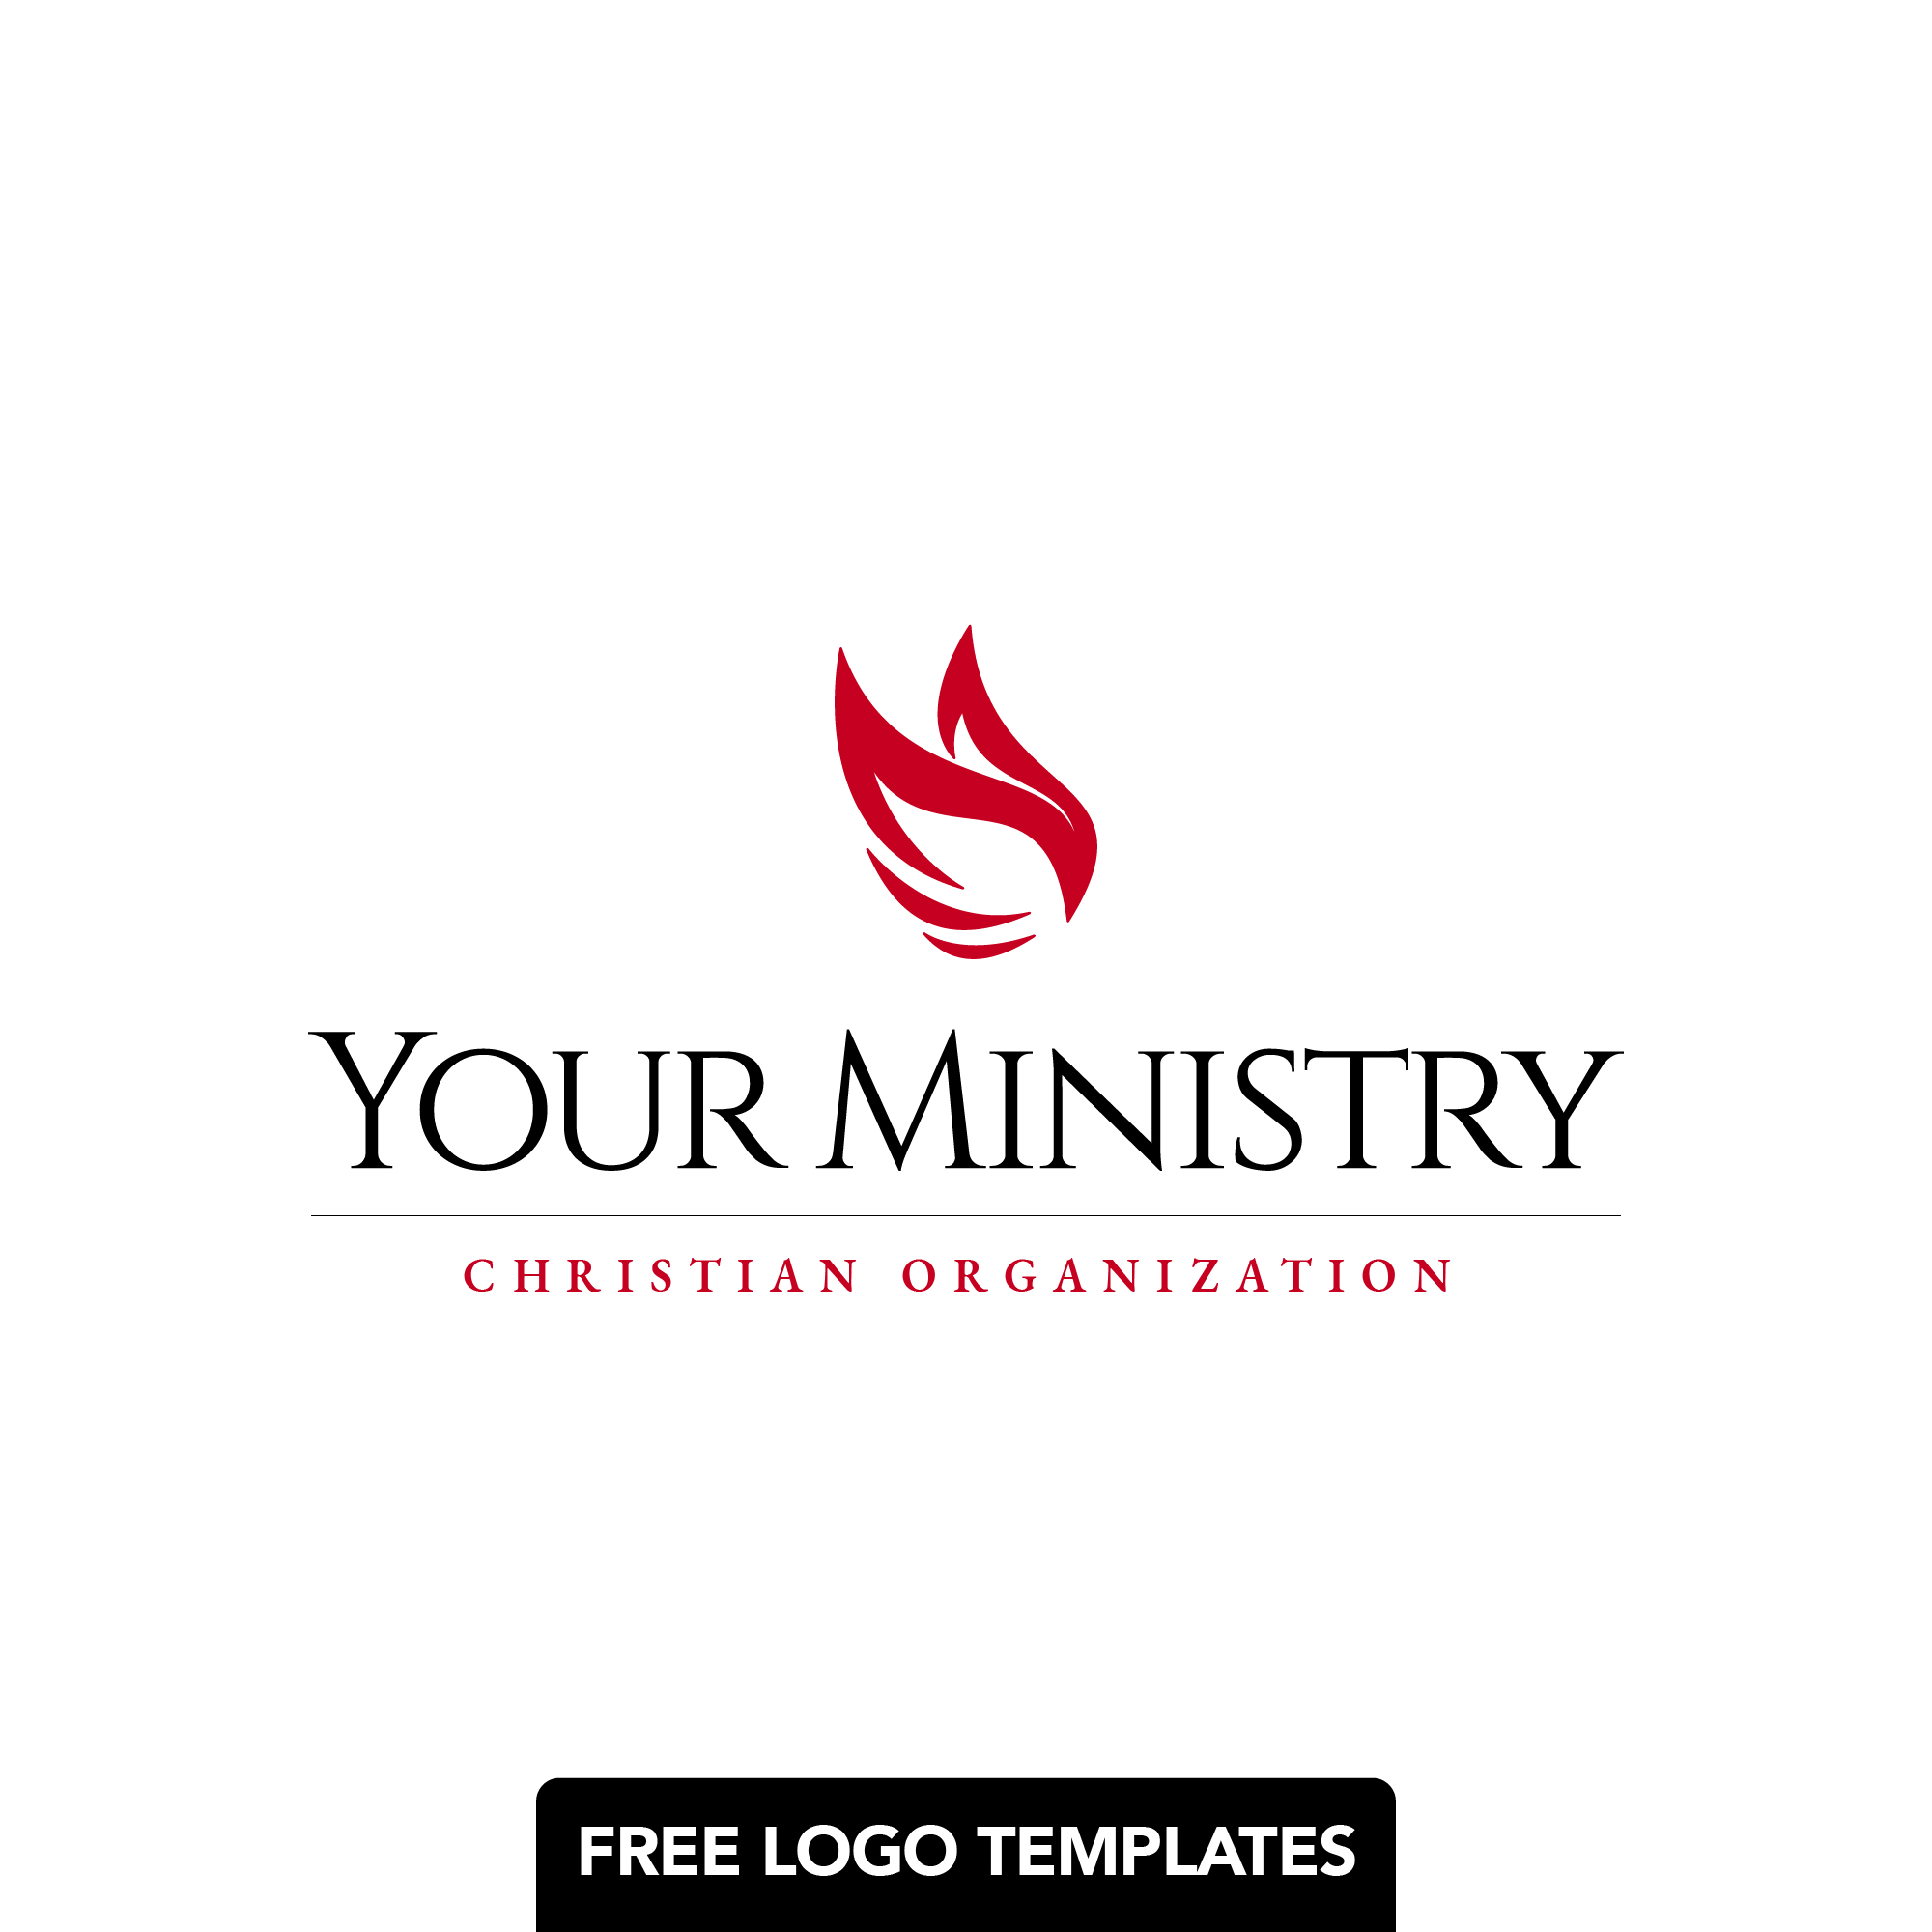 Free Logo Templates: Church Ministry Readymade Template | Photoshop (PSD) and Illustrator (AI) Files Provided